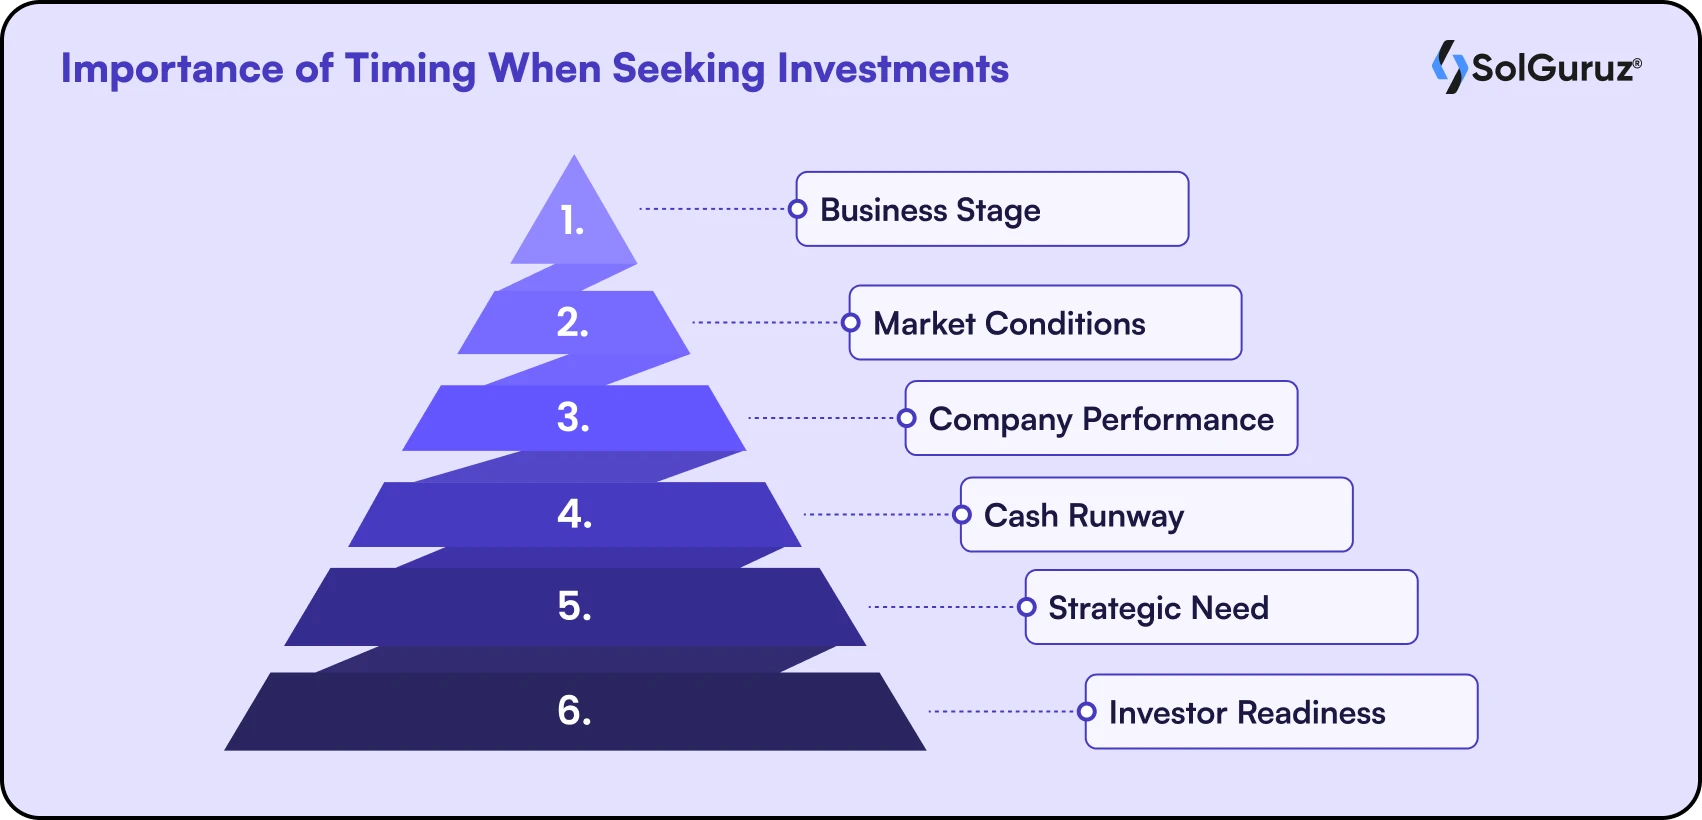 Importance of Timing When Seeking Investments